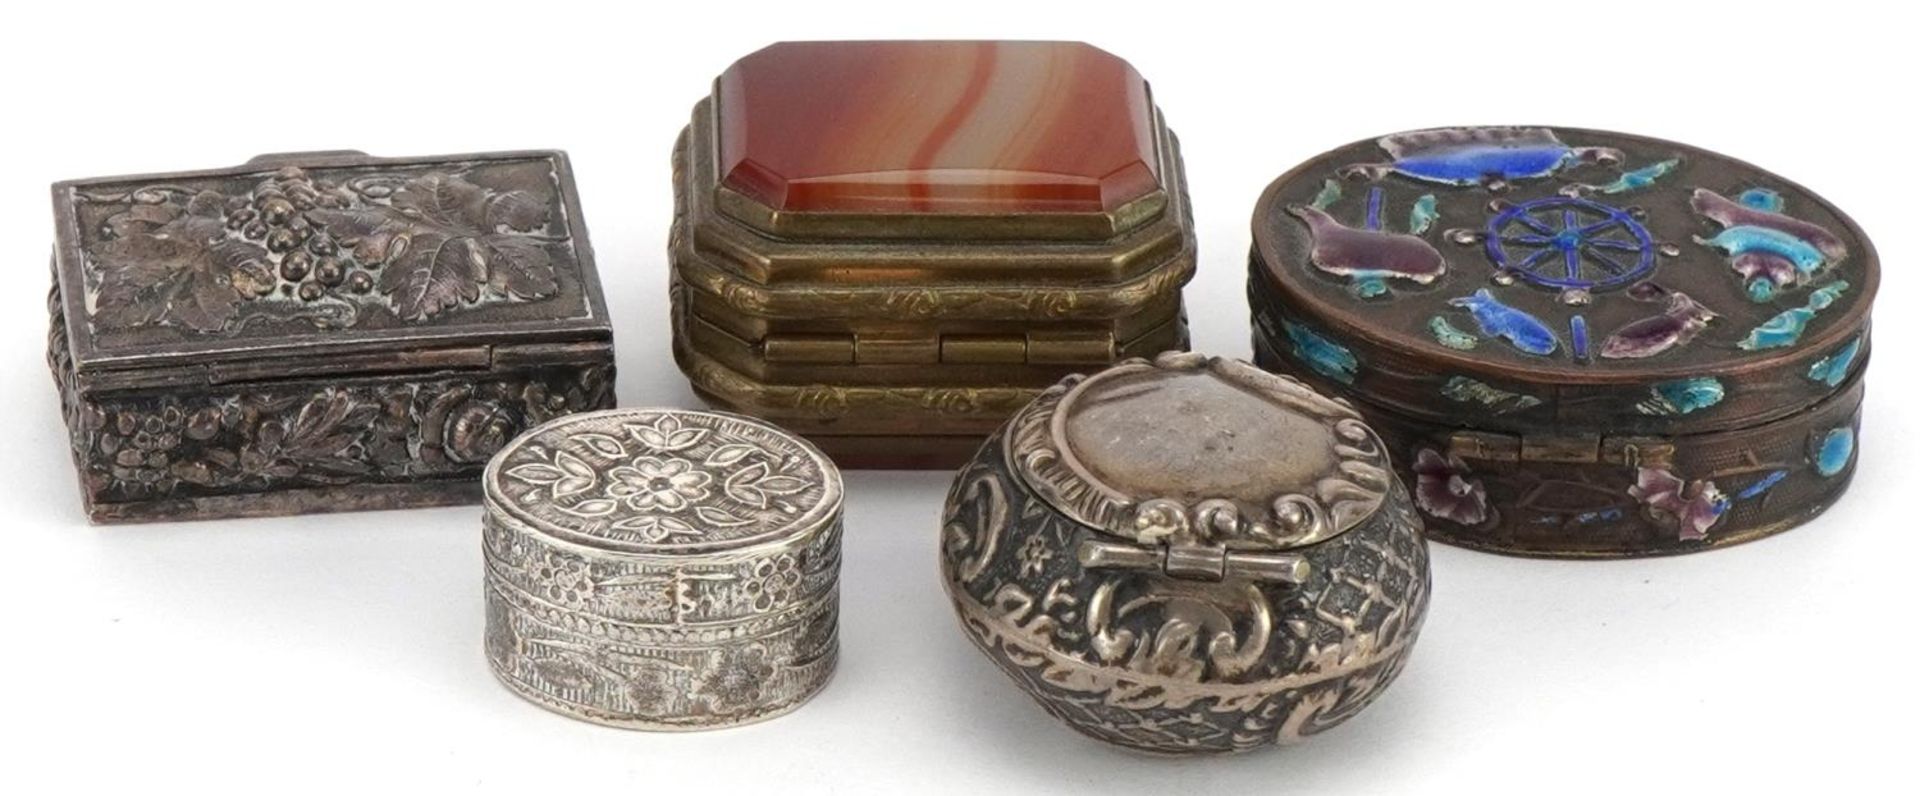 Five antique and later patch boxes, and pillboxes, some silver, including one Chinese Canton - Image 3 of 5